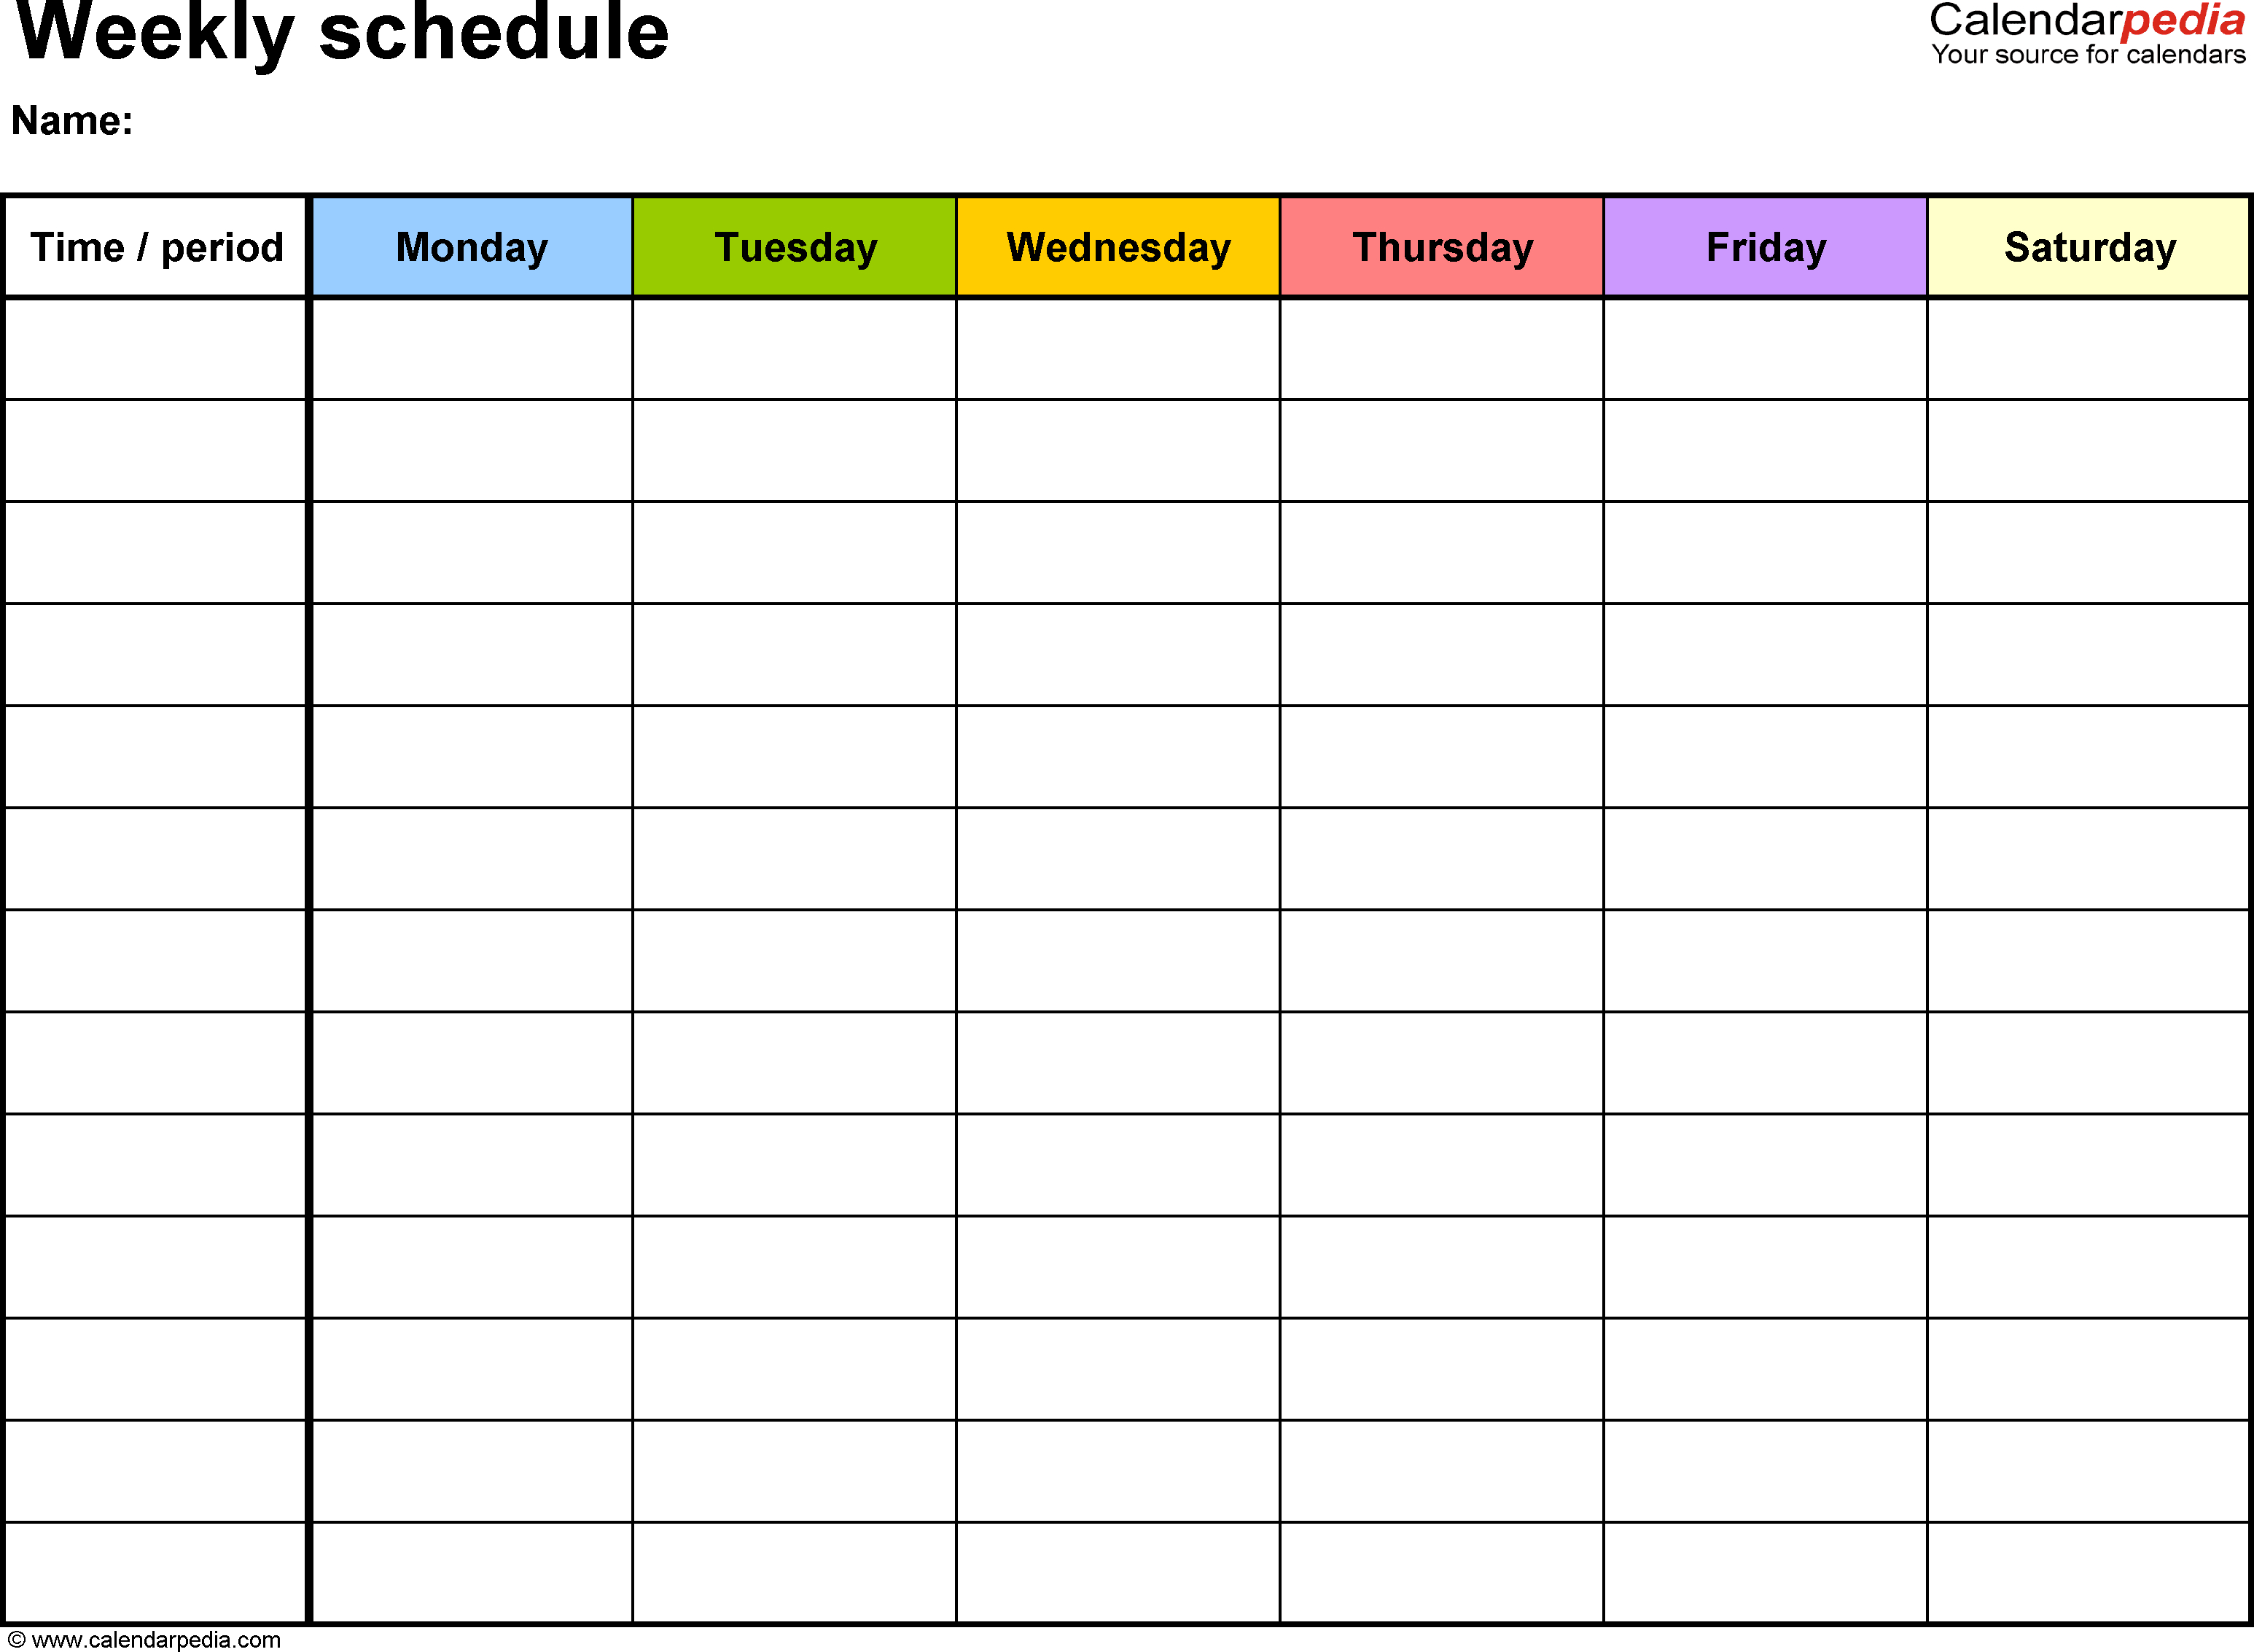 Free Weekly Schedule Templates For Word  18 Templates inside Calendar Template Monday Through Friday